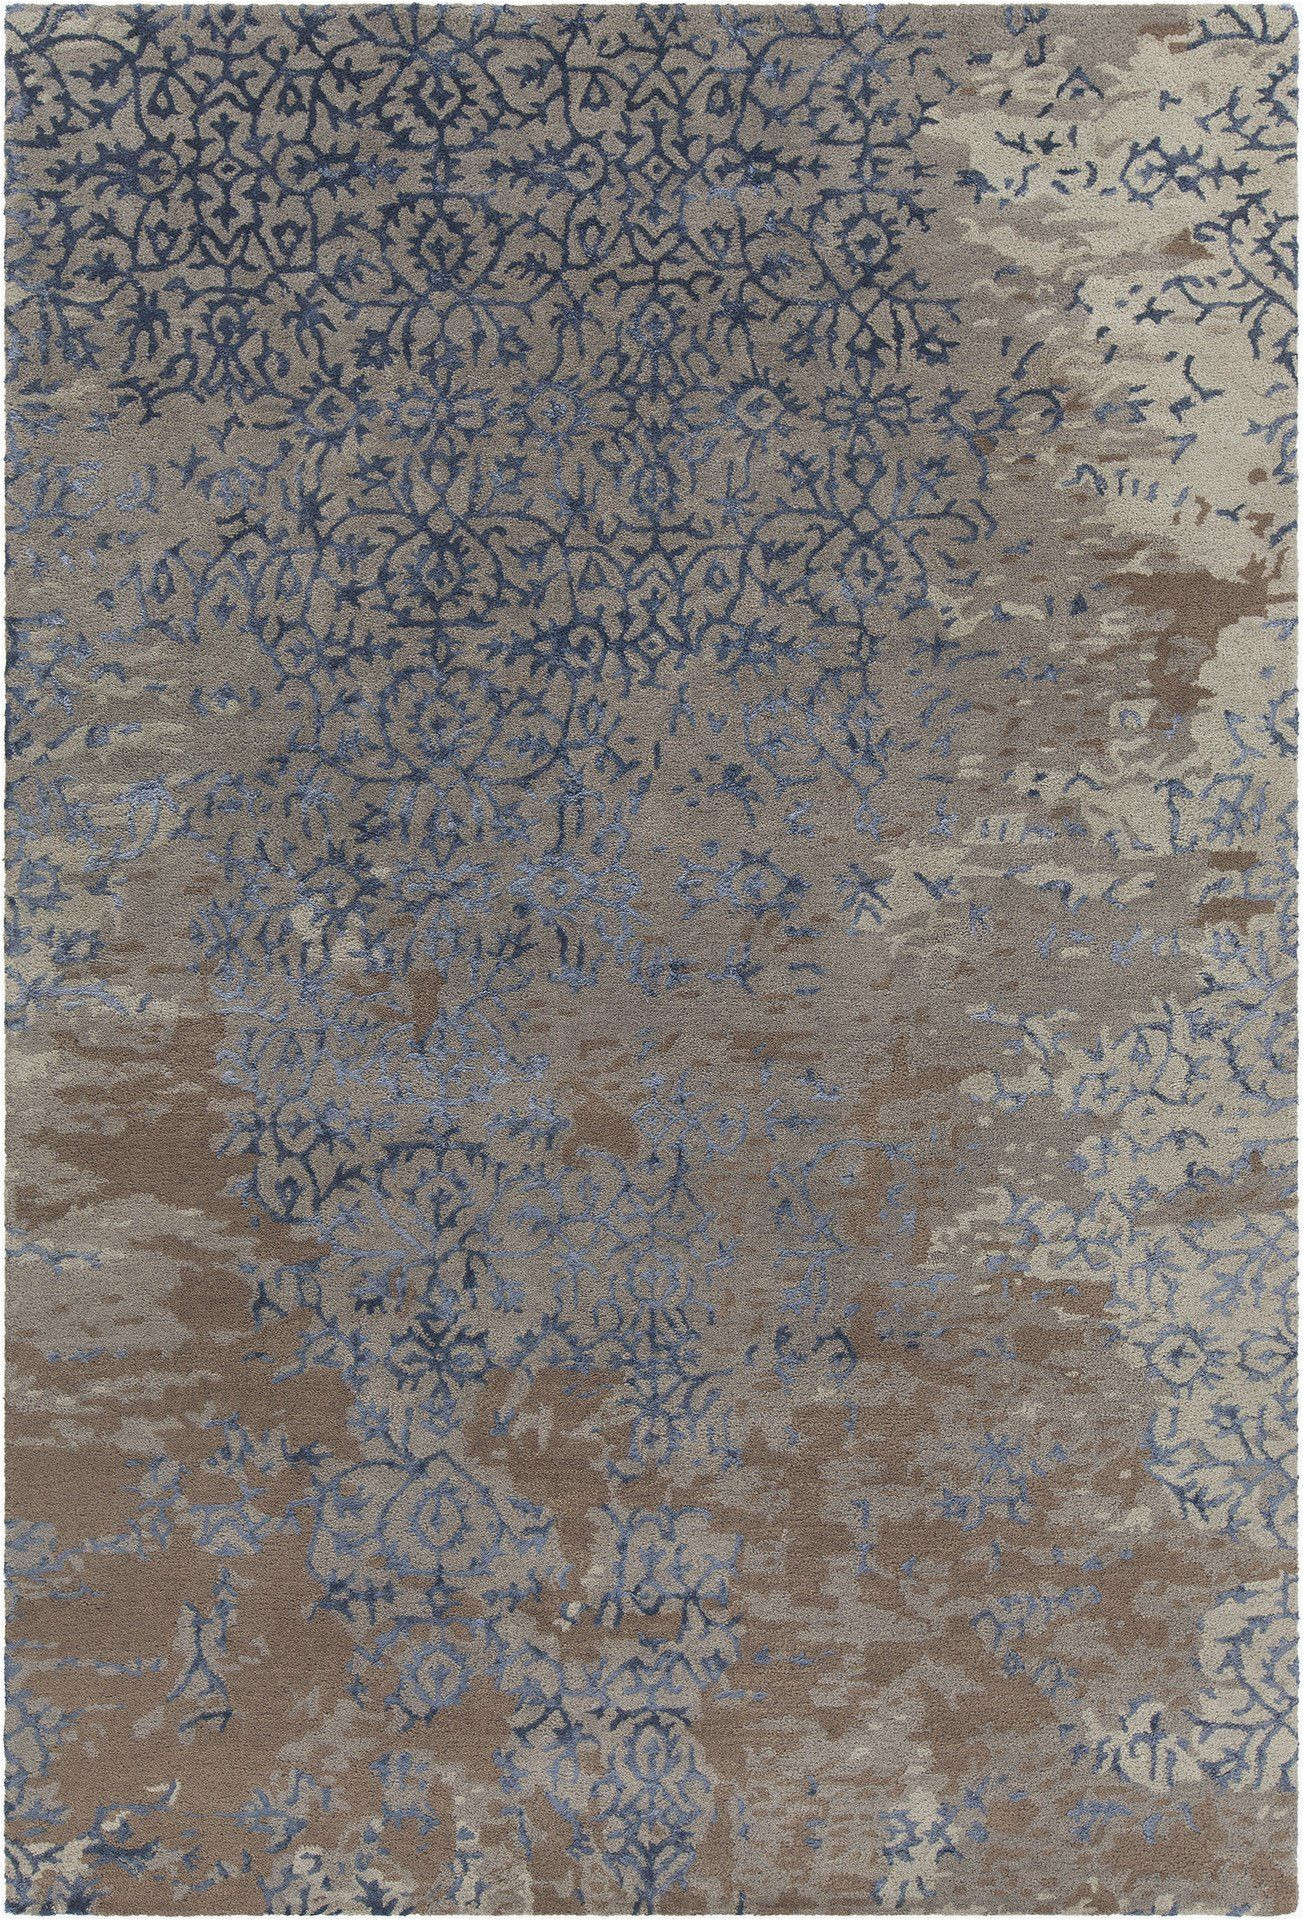 Blue Brown Rug Contemporary Rupec Collection Hand Tufted area Rug In Grey Blue Brown